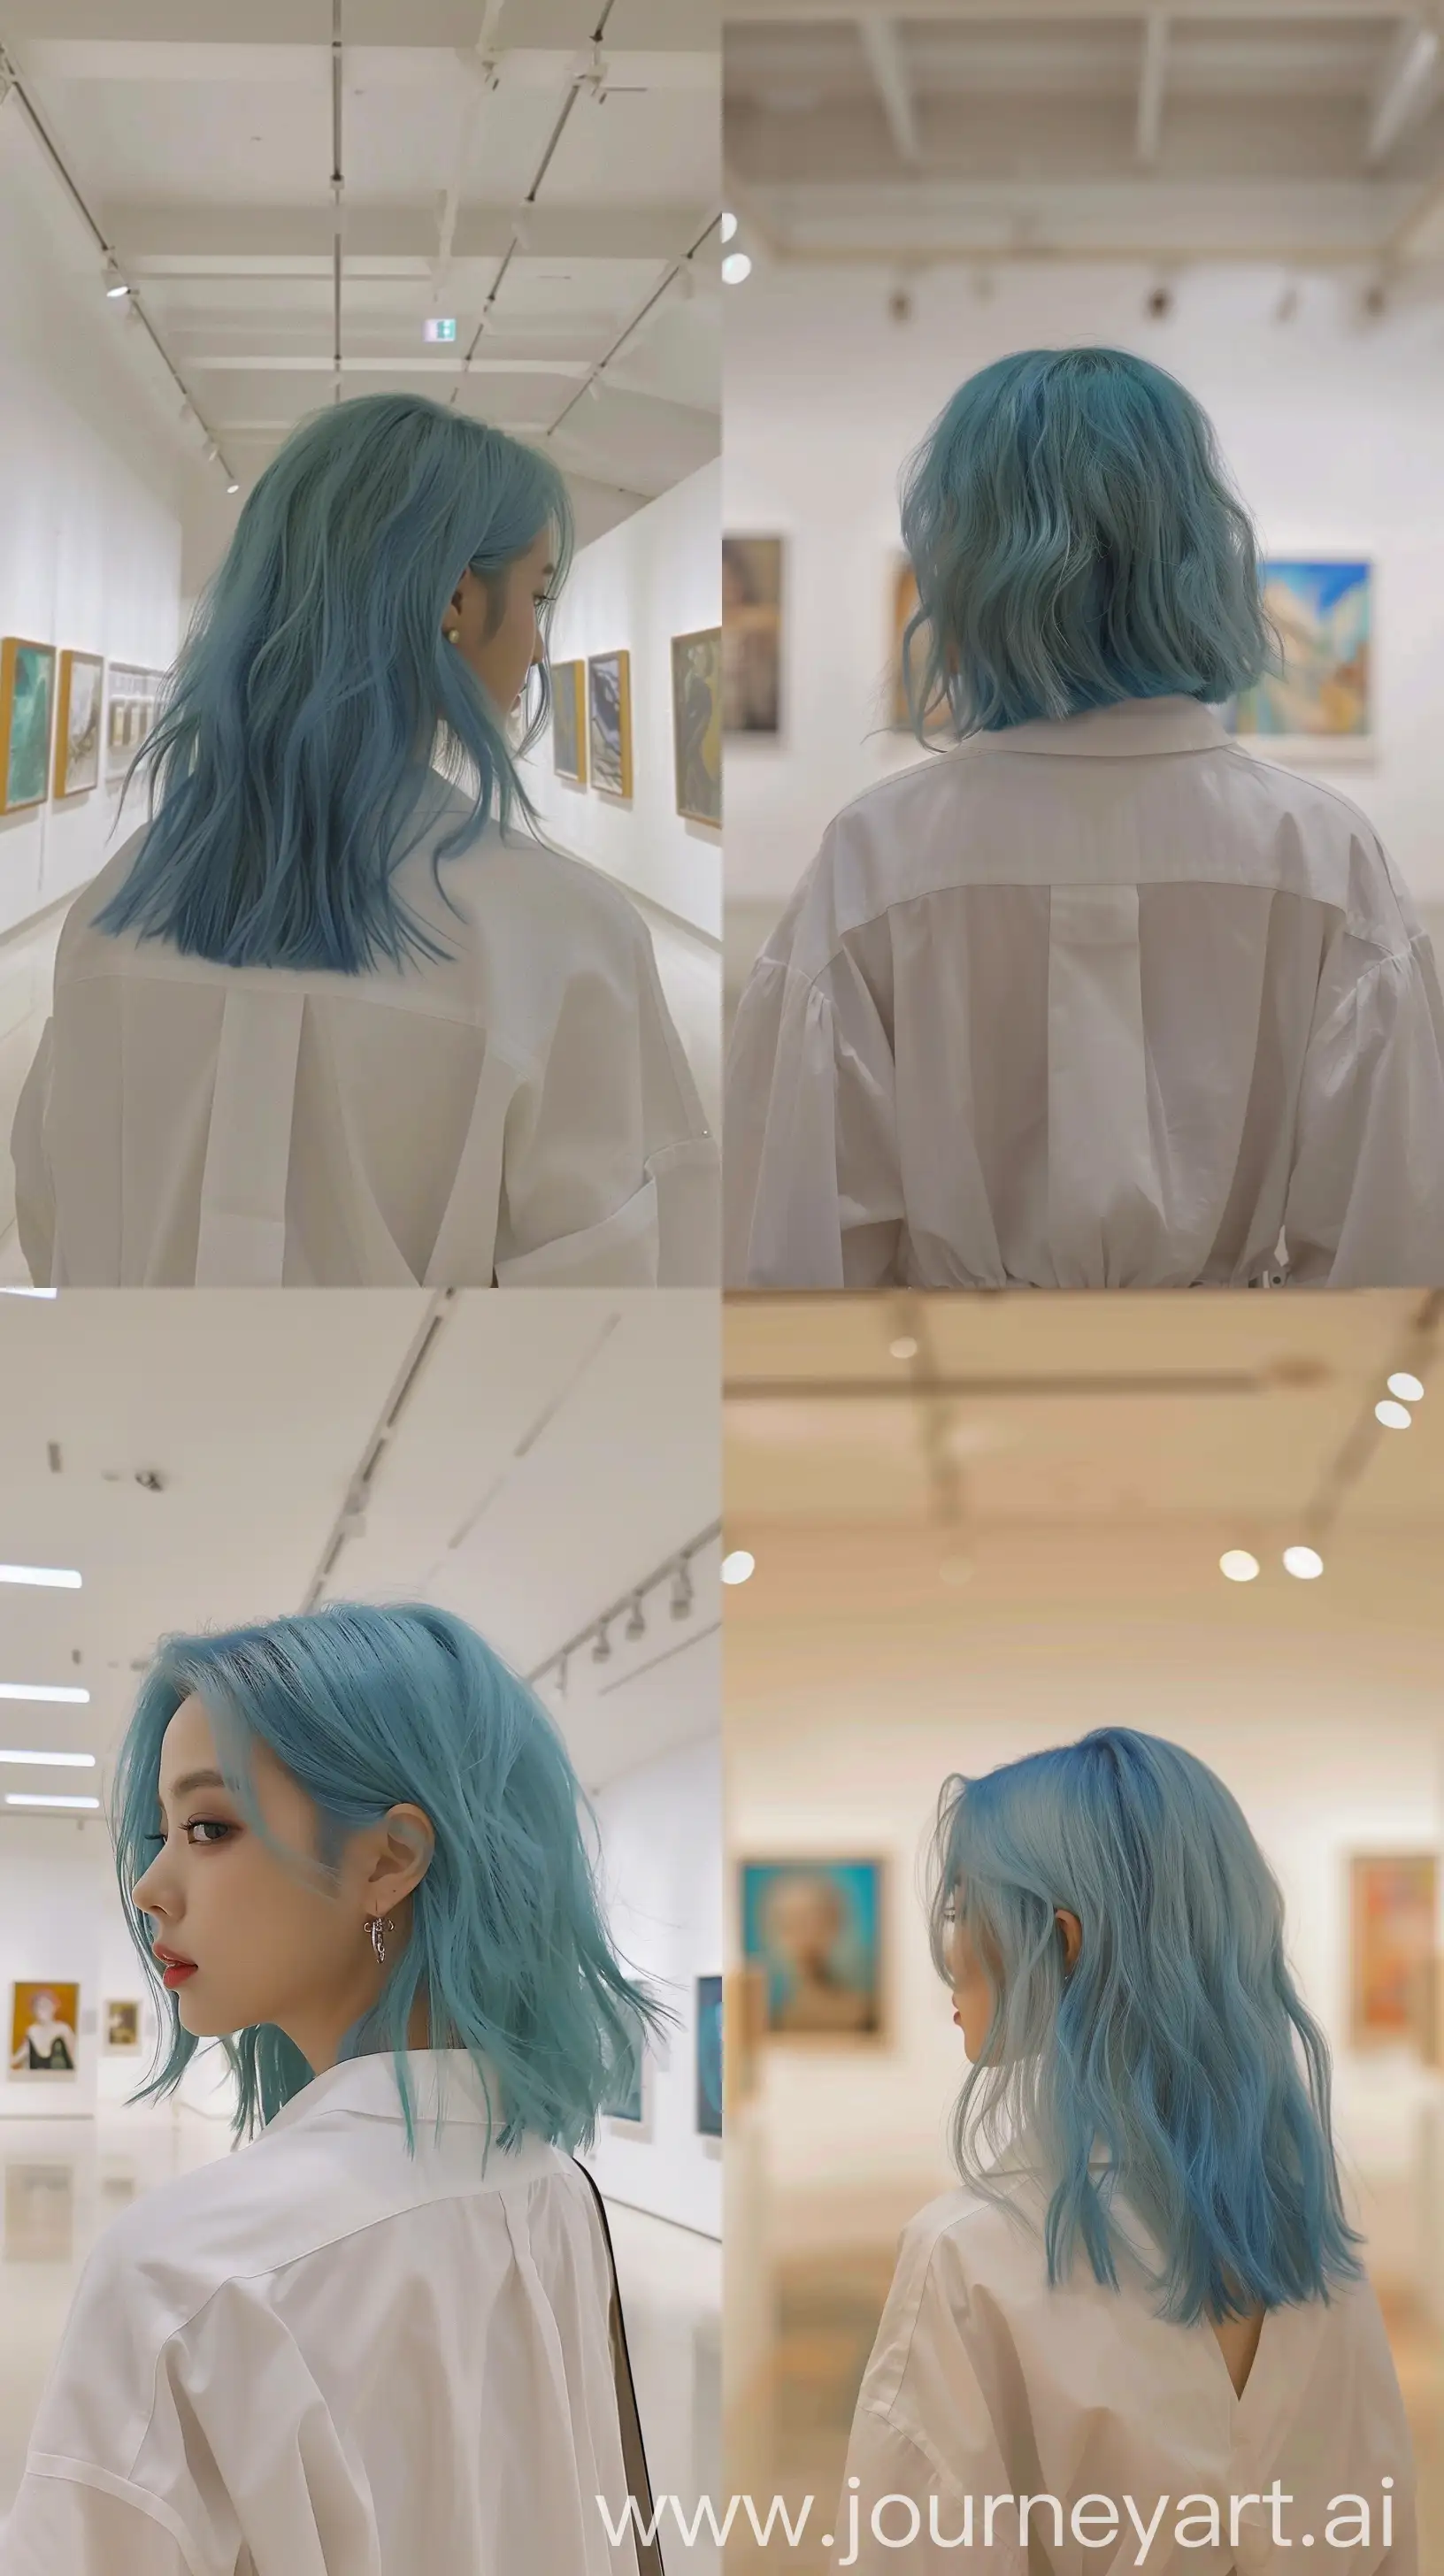 Blackpinks-Jennie-with-Blue-Wolfcut-Hair-in-Art-Gallery